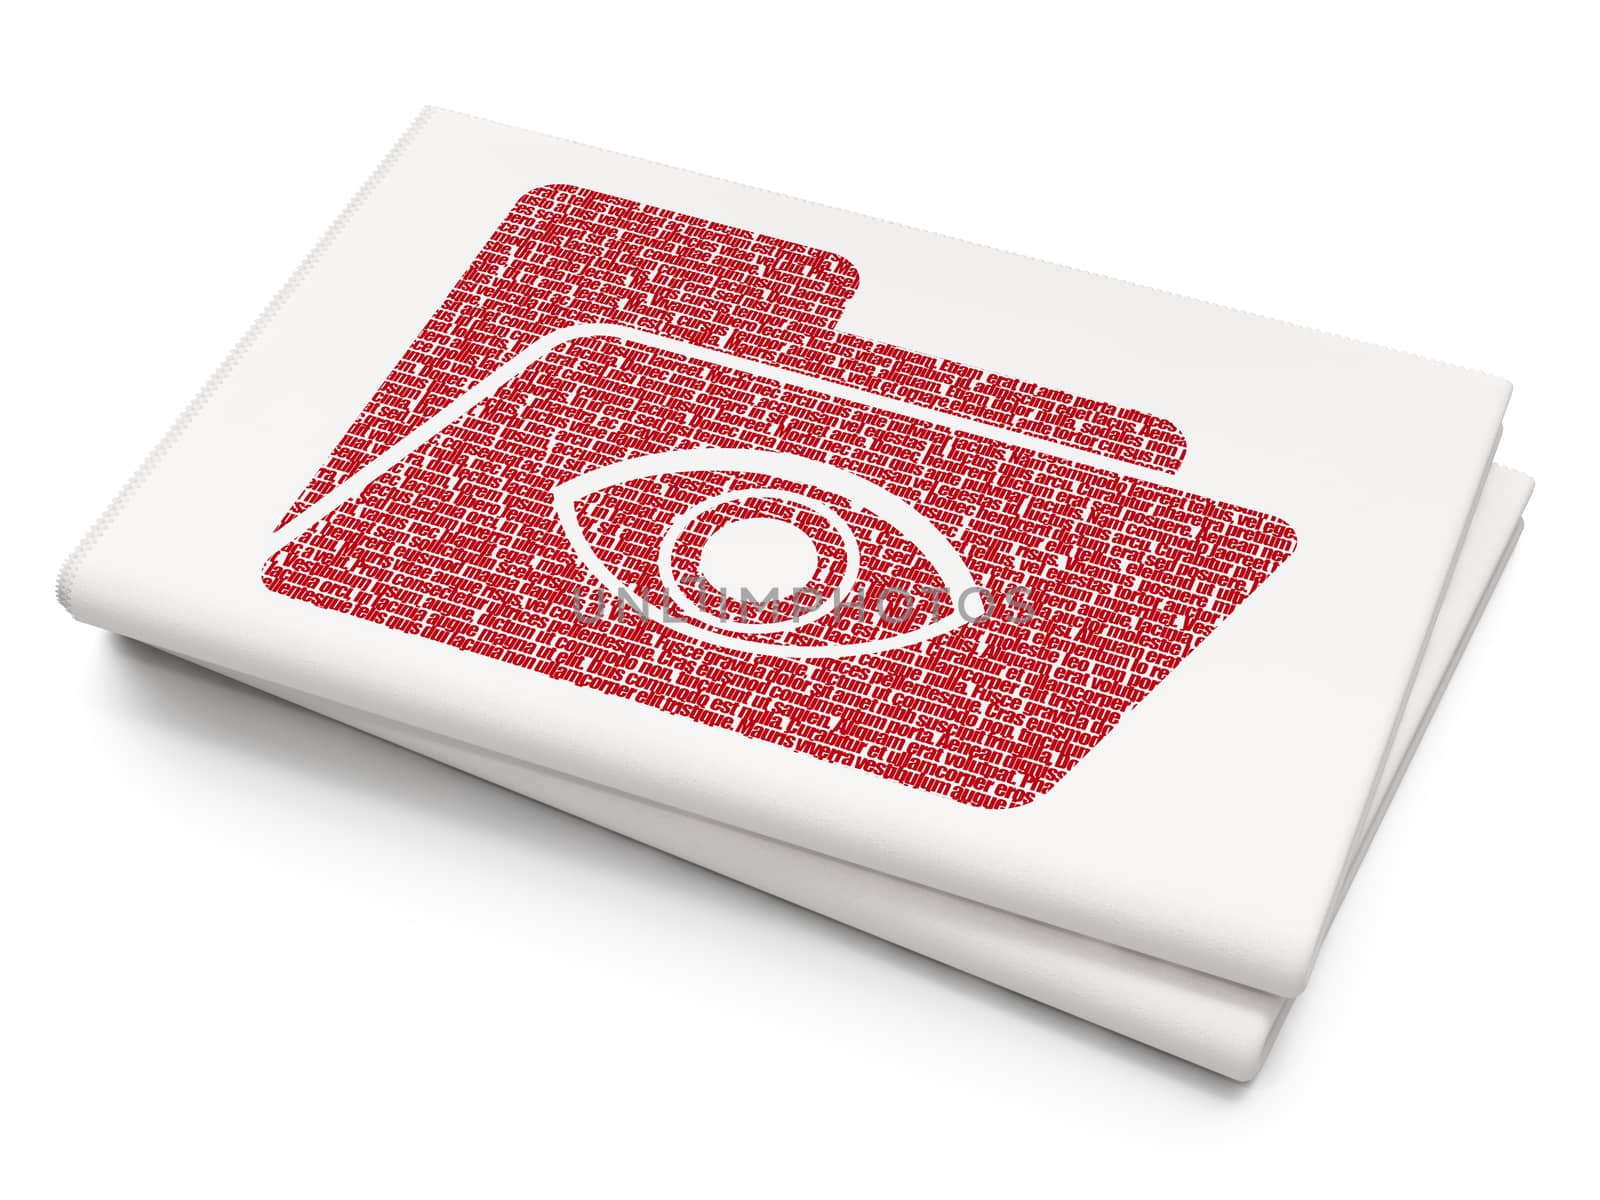 Business concept: Pixelated red Folder With Eye icon on Blank Newspaper background, 3D rendering